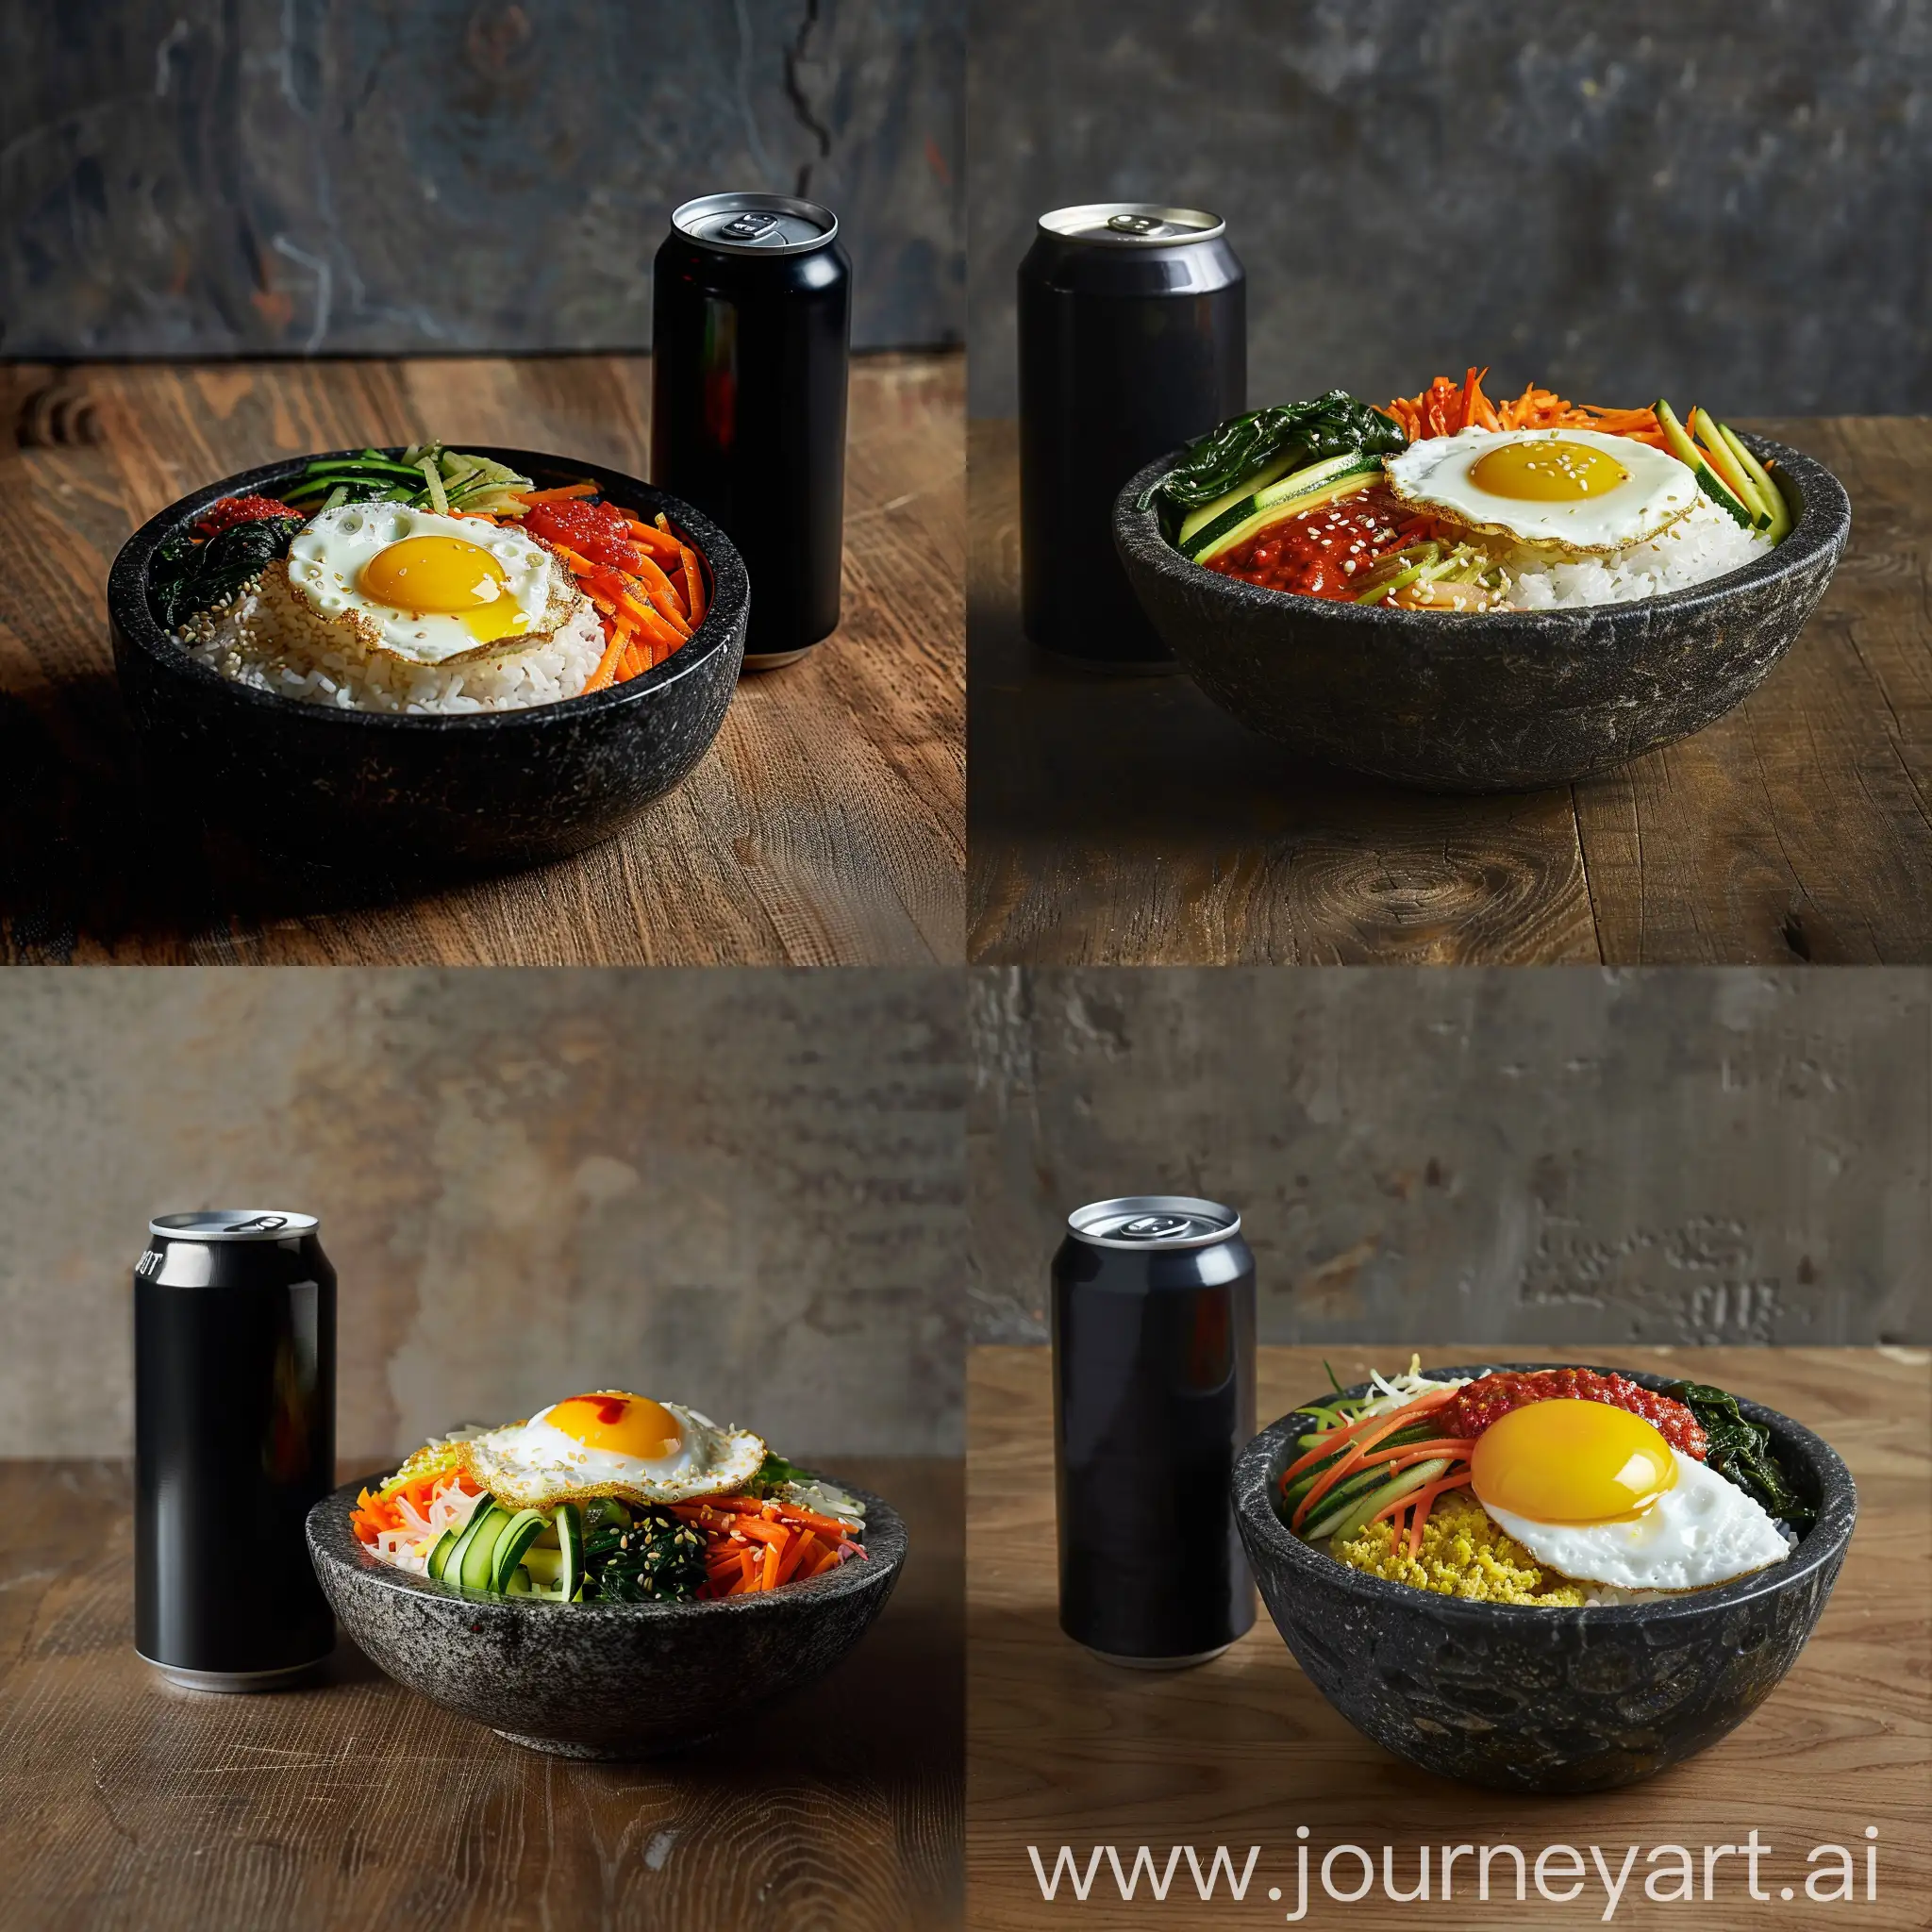 In this culinary composition, a simple black can of soft drink sits beside a visually captivating bowl of Bibimbap on a wooden table. The can's understated design contrasts with the vivid colors and textures of the Bibimbap, a traditional Korean rice dish, creating an atmosphere of cultural fusion and gastronomic exploration.
The Bibimbap is presented in a traditional stone bowl, its contents an enticing medley of colors and flavors. A perfectly cooked egg, its golden yolk glistening, rests atop a bed of fluffy white rice, encircled by an assortment of seasoned vegetables, including julienned carrots, zucchini, and spinach. A dollop of vibrant red gochujang sauce adds a spicy kick to the dish.
The front-view perspective of this scene allows the viewer to fully appreciate the intricate details of the Bibimbap and the interplay of colors and textures between the soft drink can and the traditional Korean dish—a visual representation of the joy of discovering new flavors and culinary experiences.